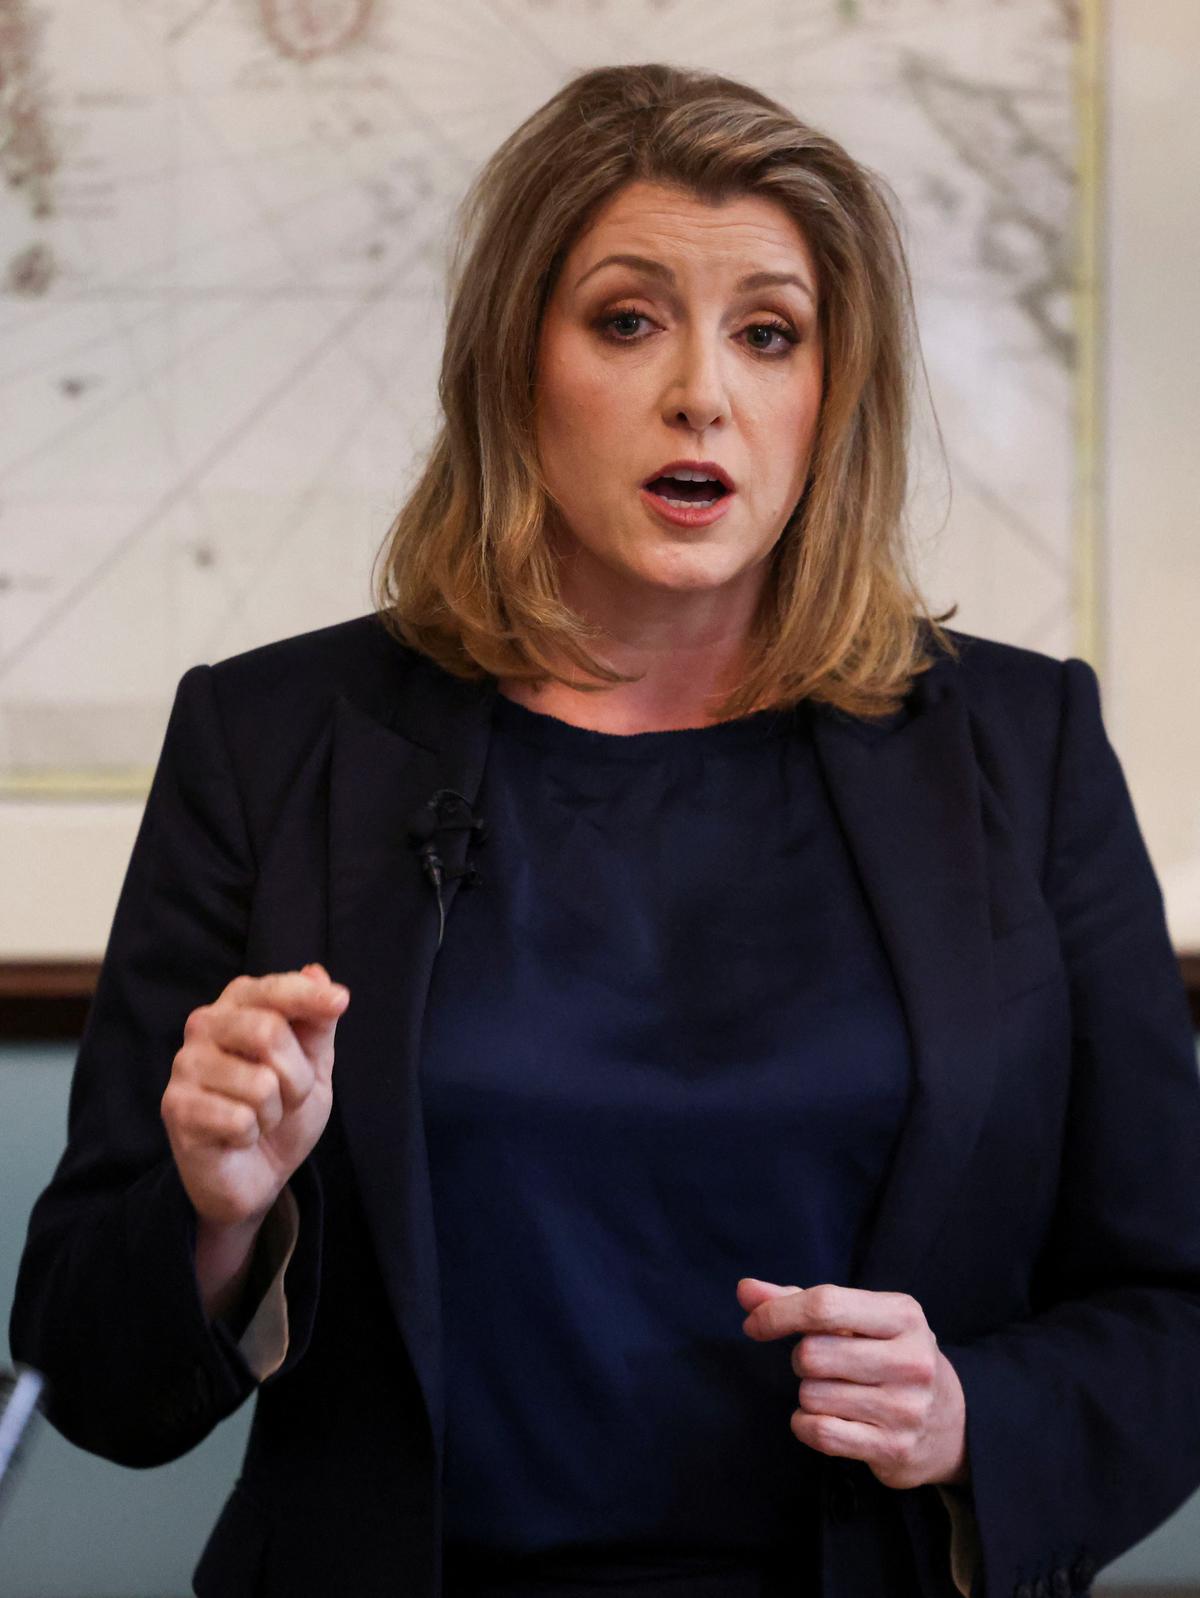 British Conservative MP Penny Mordaunt speaks at an event to launch her campaign to be the next Conservative leader and Prime Minister, in London, Britain July 13, 2022. 